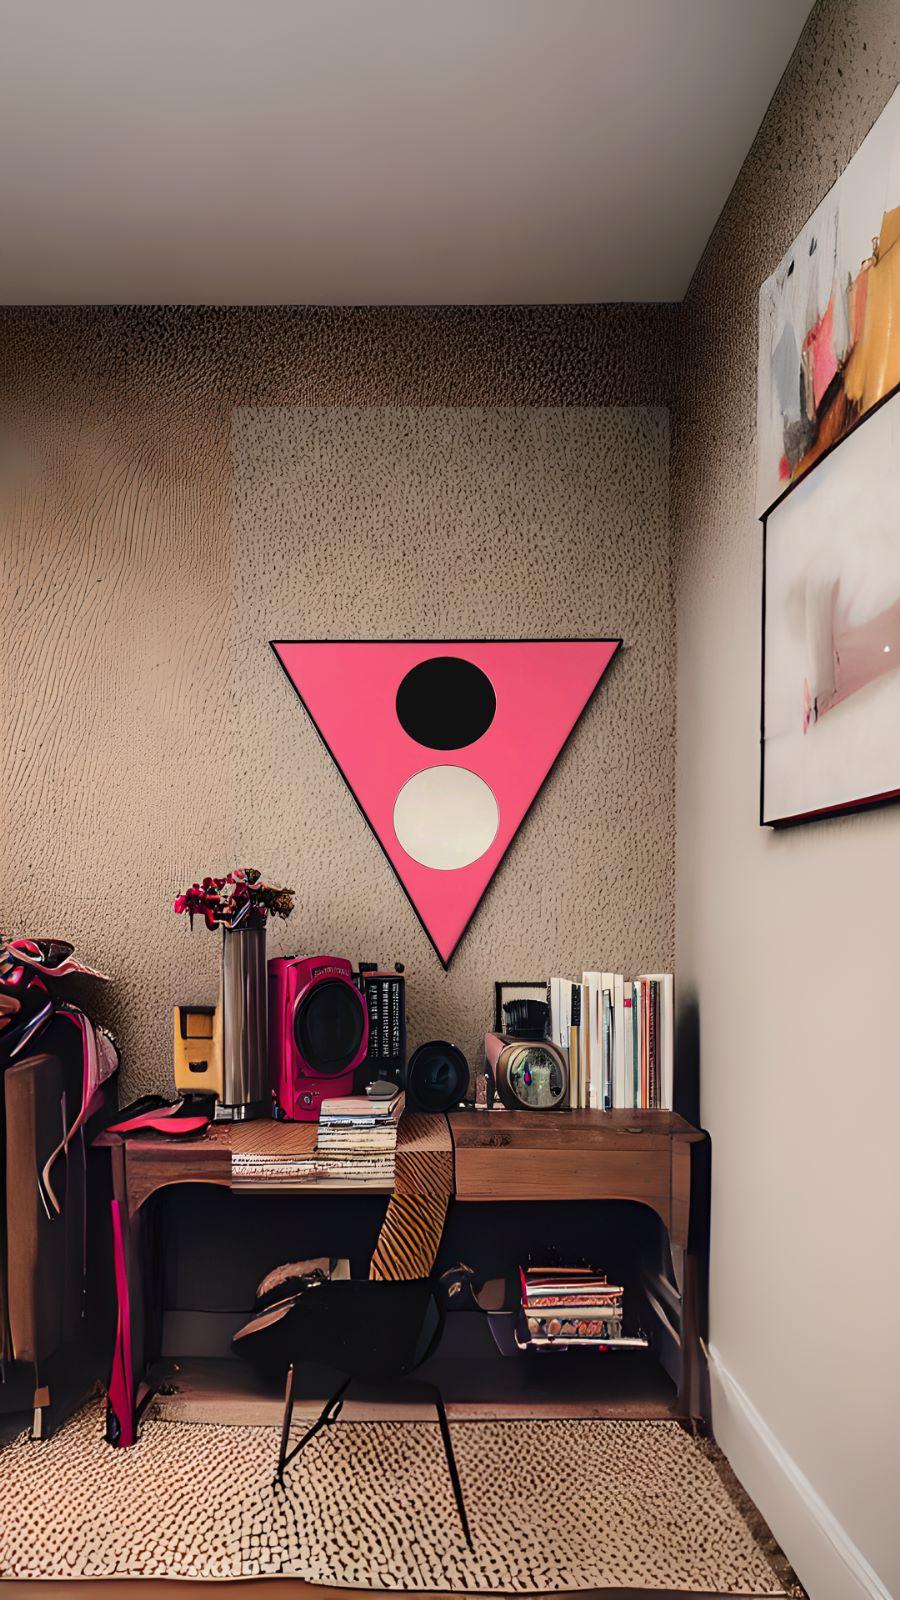 Modern Triangular Mirror 'Amore E Psiche', in Bubble Pink Iron In New Condition For Sale In Milan, IT